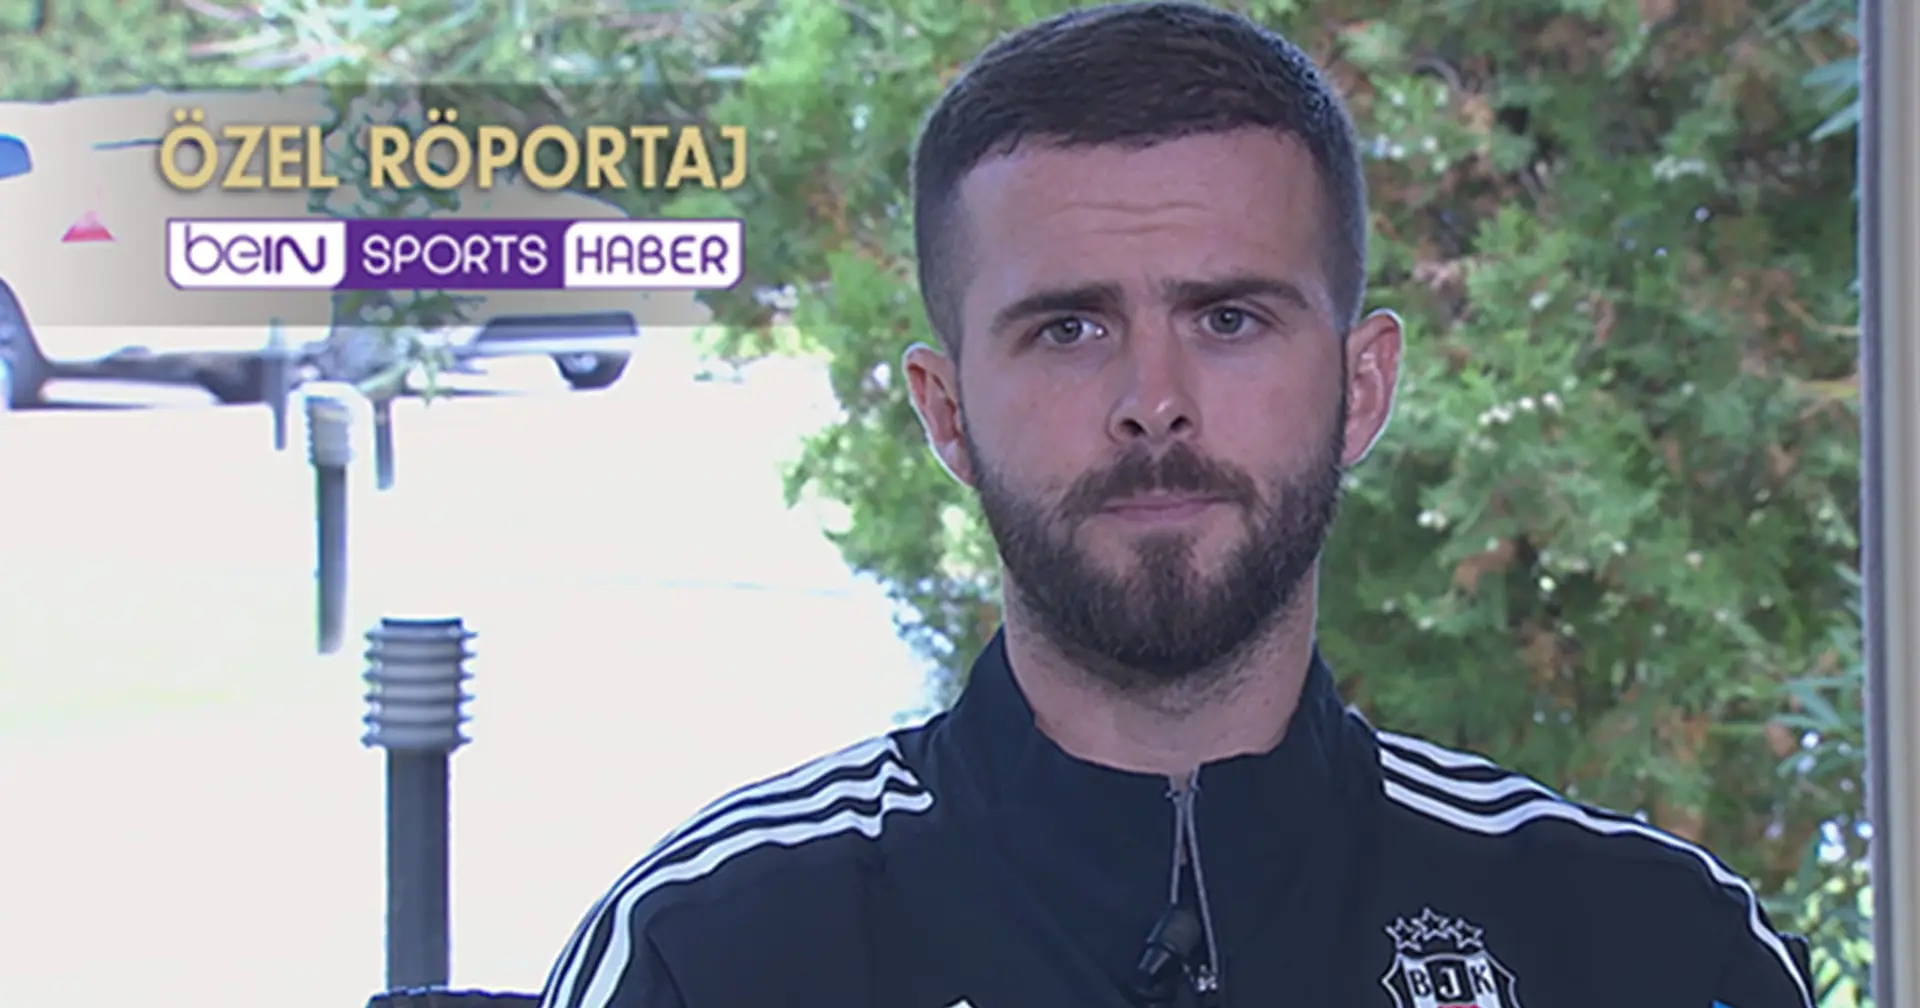 'The players are under pressure': Pjanic names one thing Barca badly need to improve